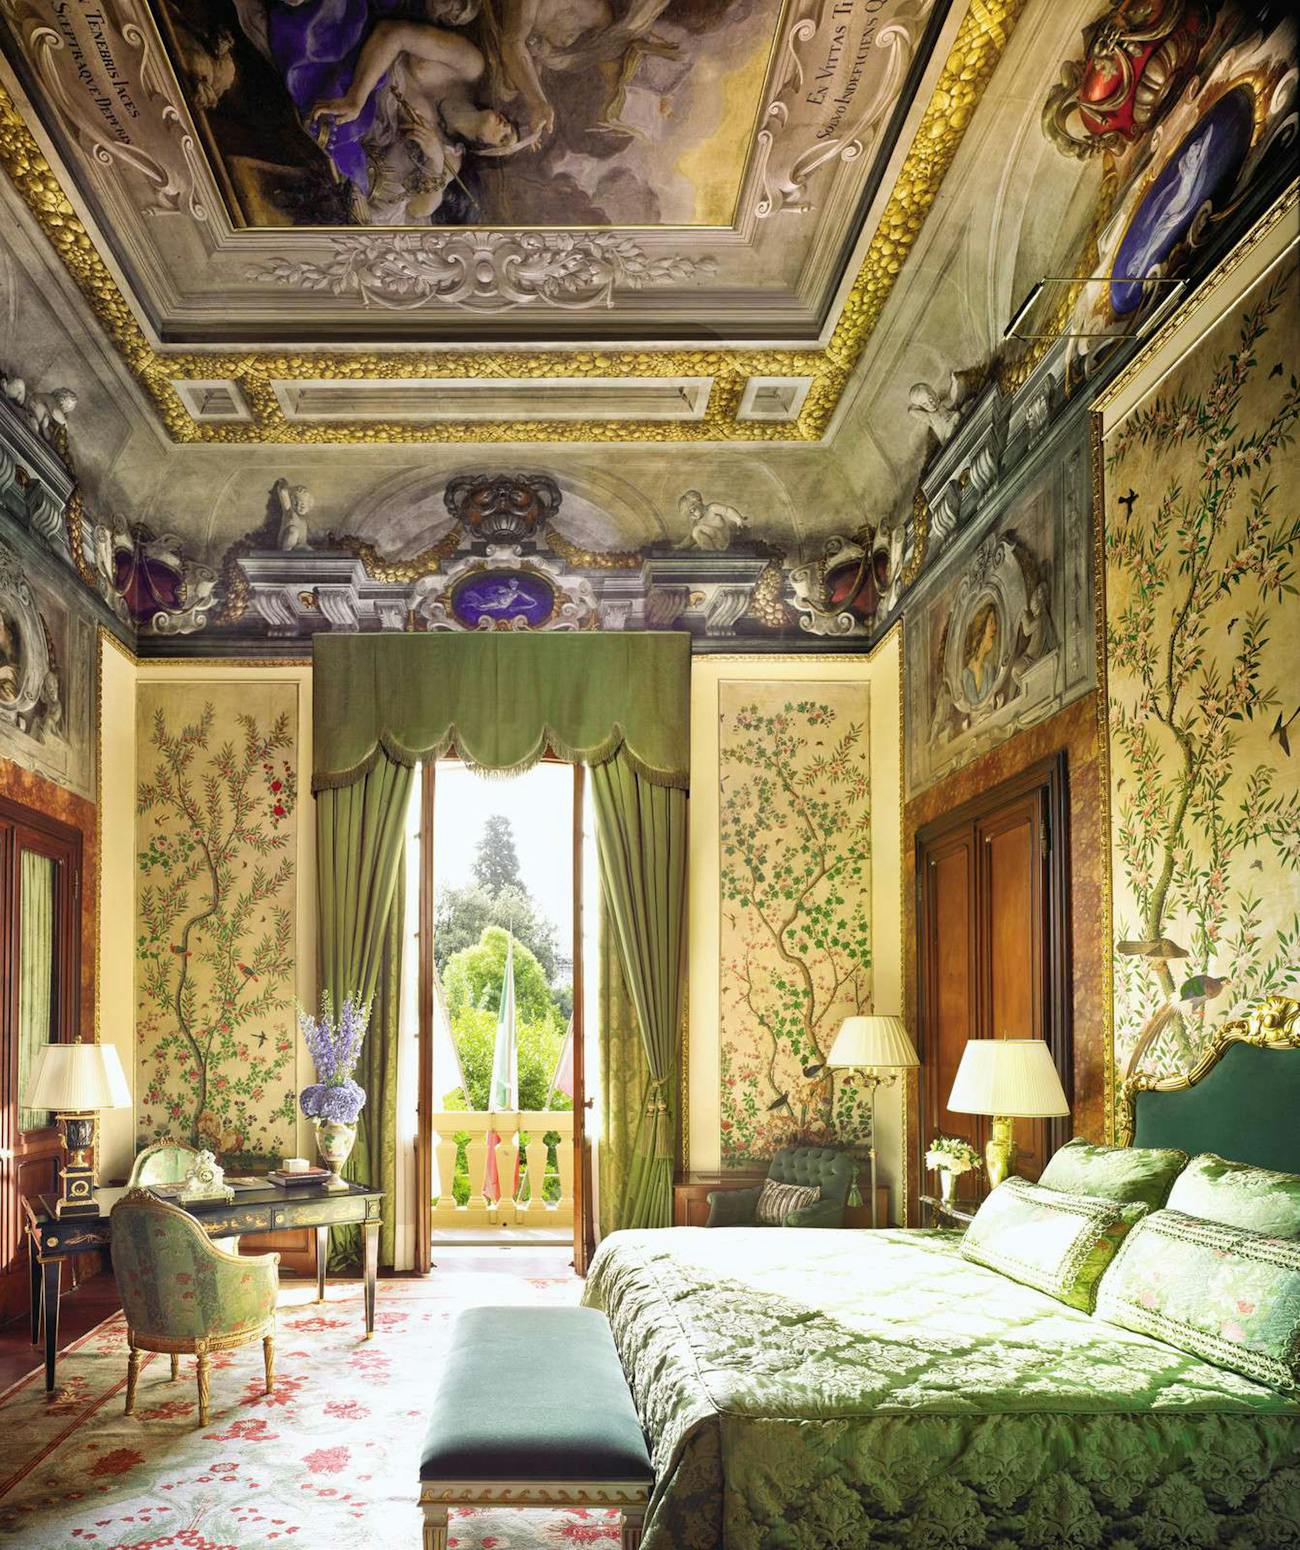 Hotel rooms furnished in exuberant Renaissance style